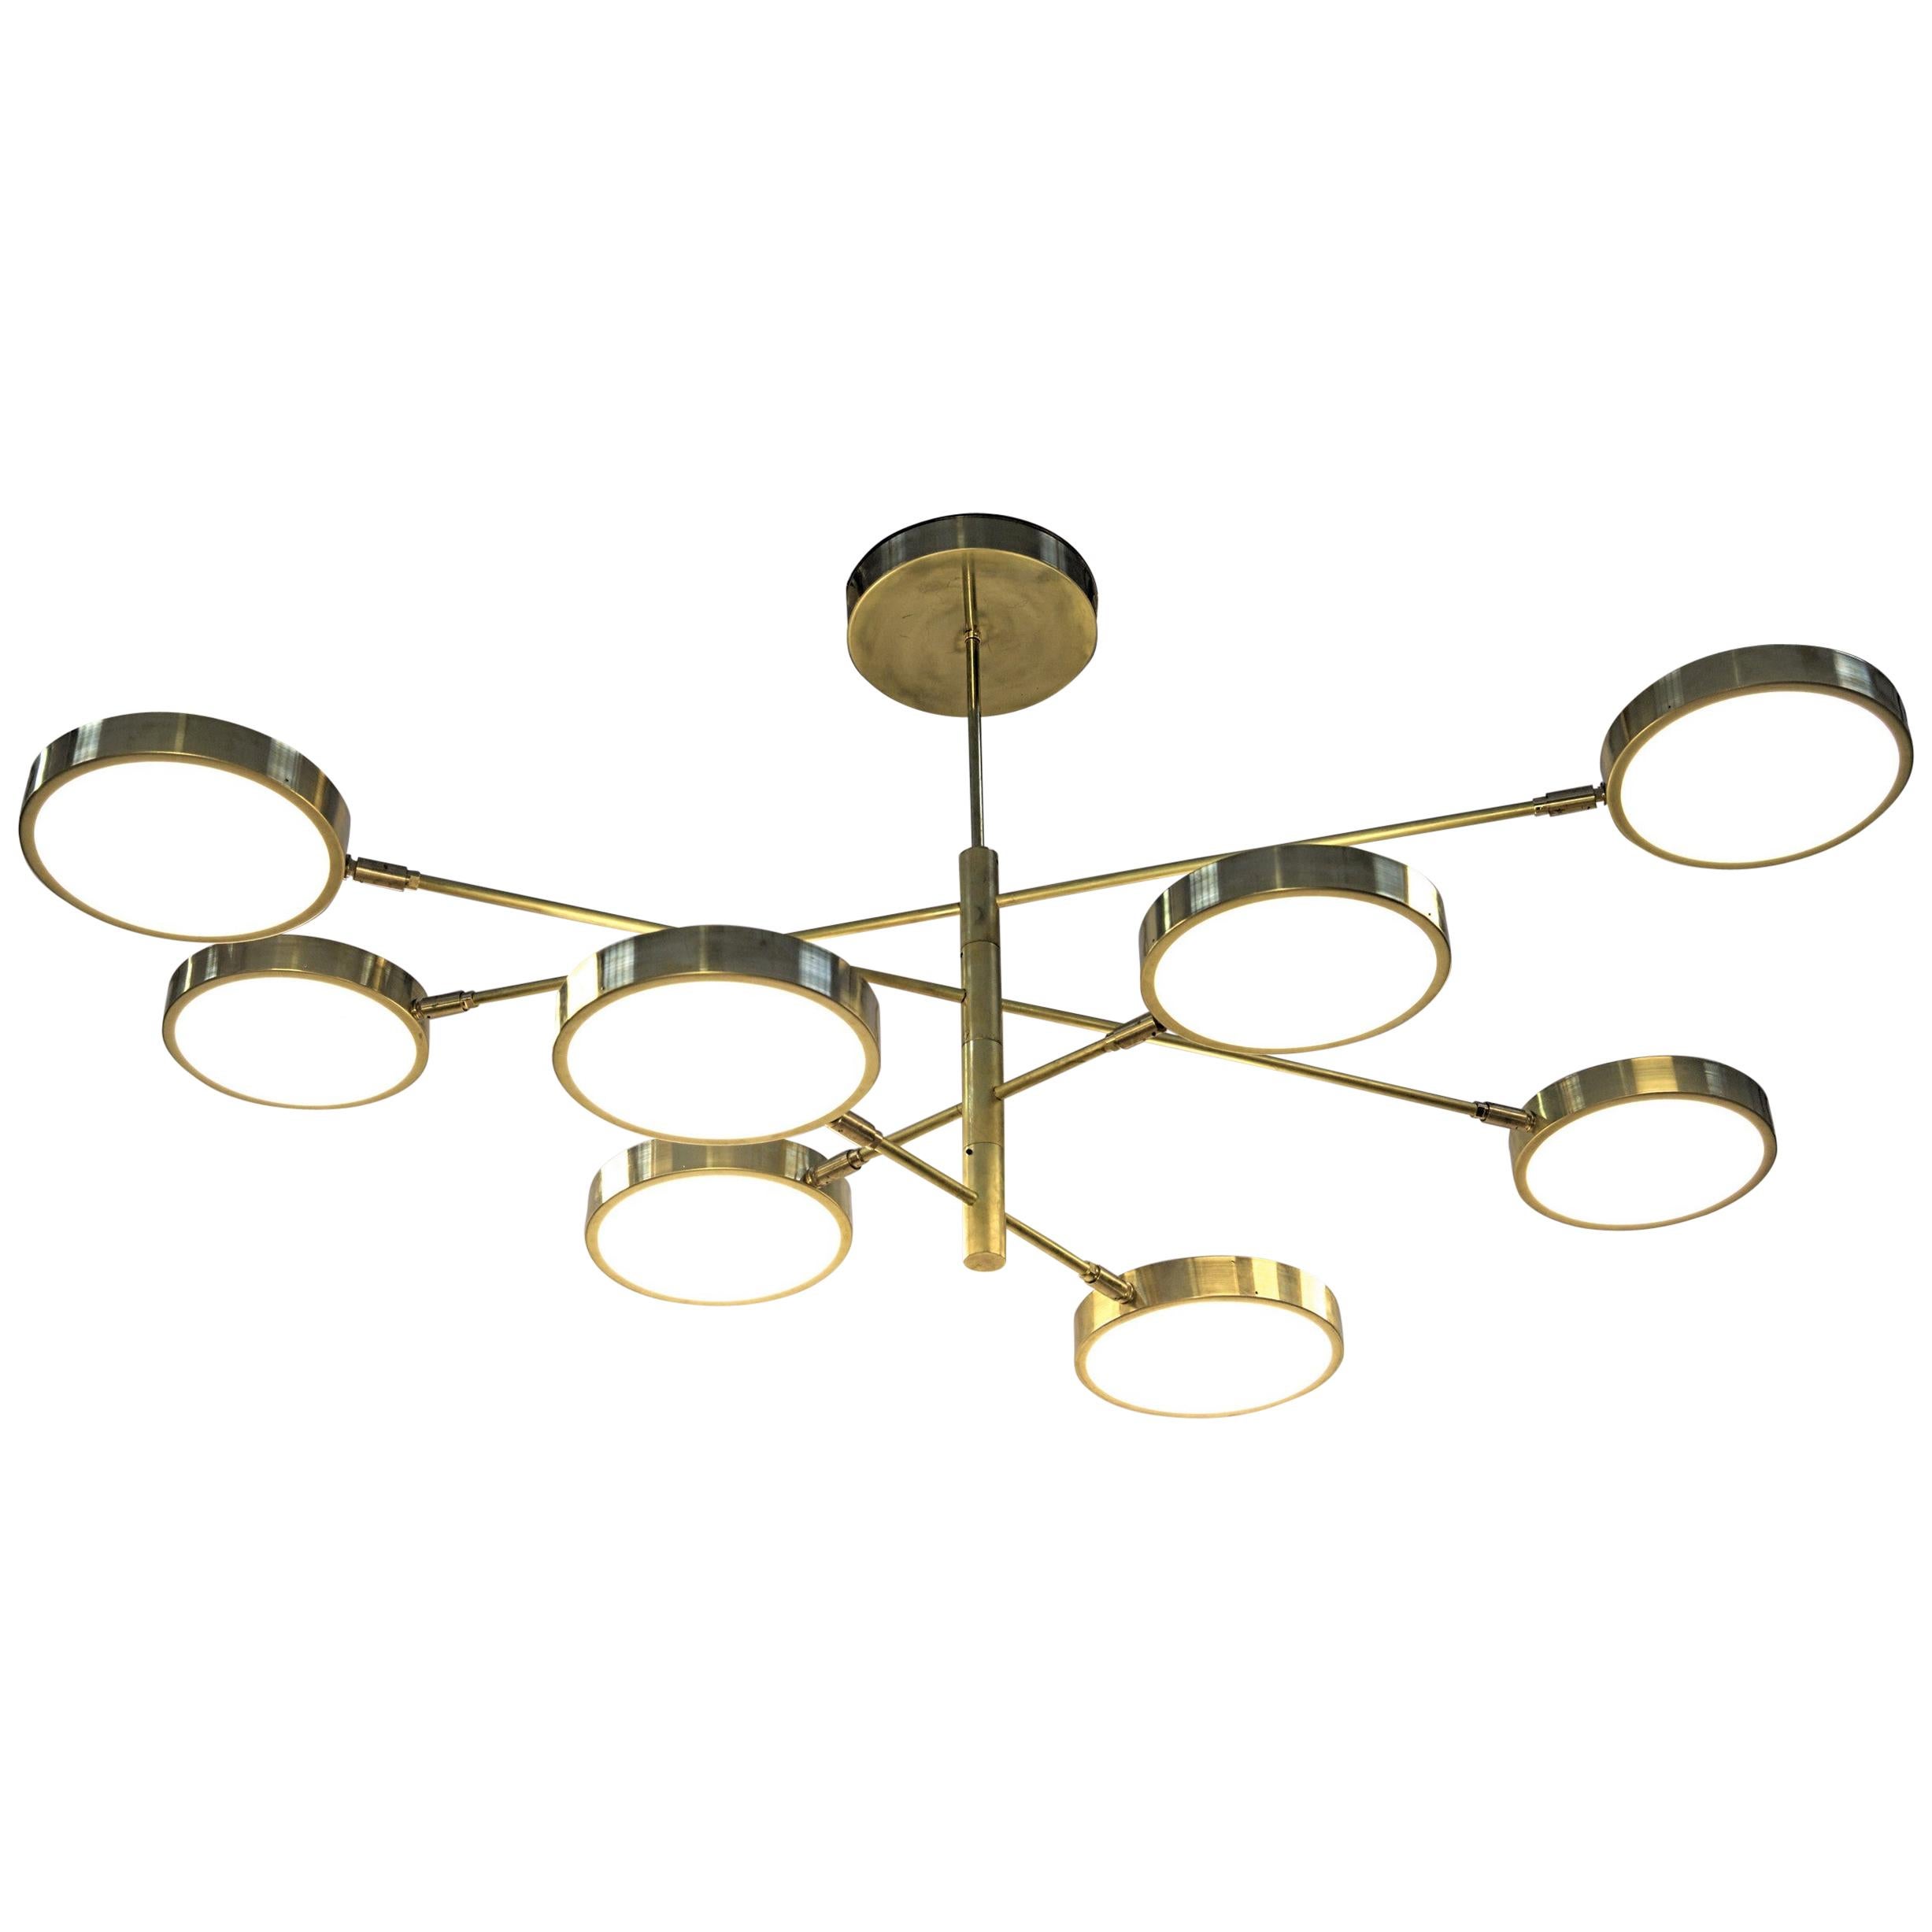 Orbitale Planetario Brass 8 Rotating Arms Chandelier, Featured for Dining Table 